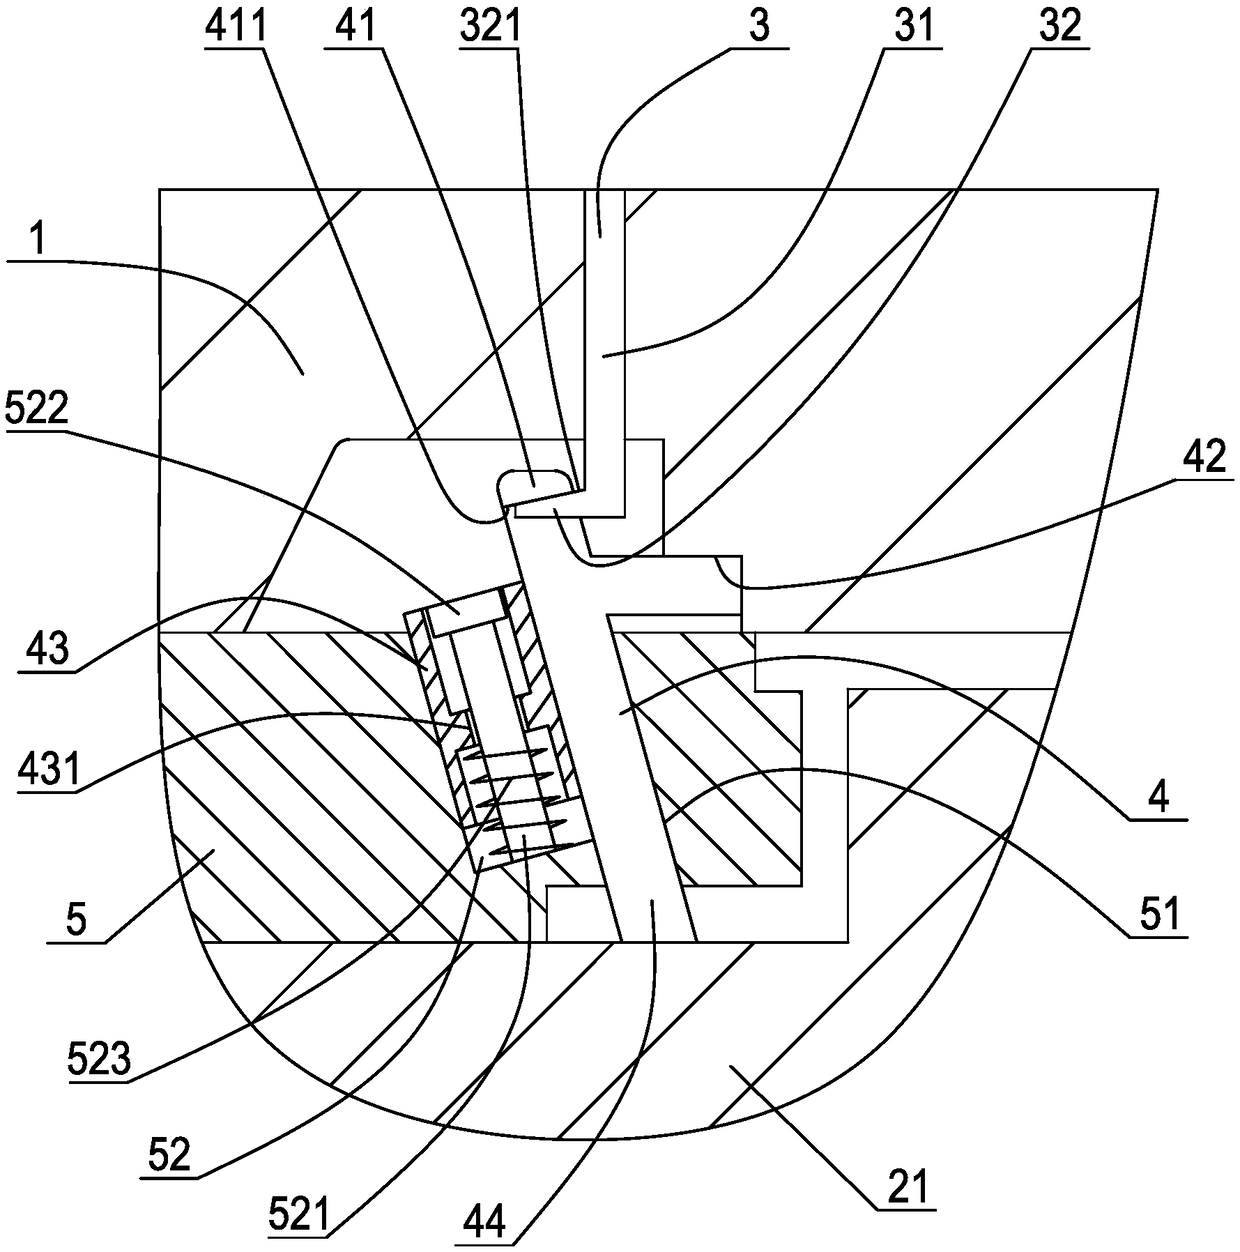 A hierarchical core-pulling method for injection molds